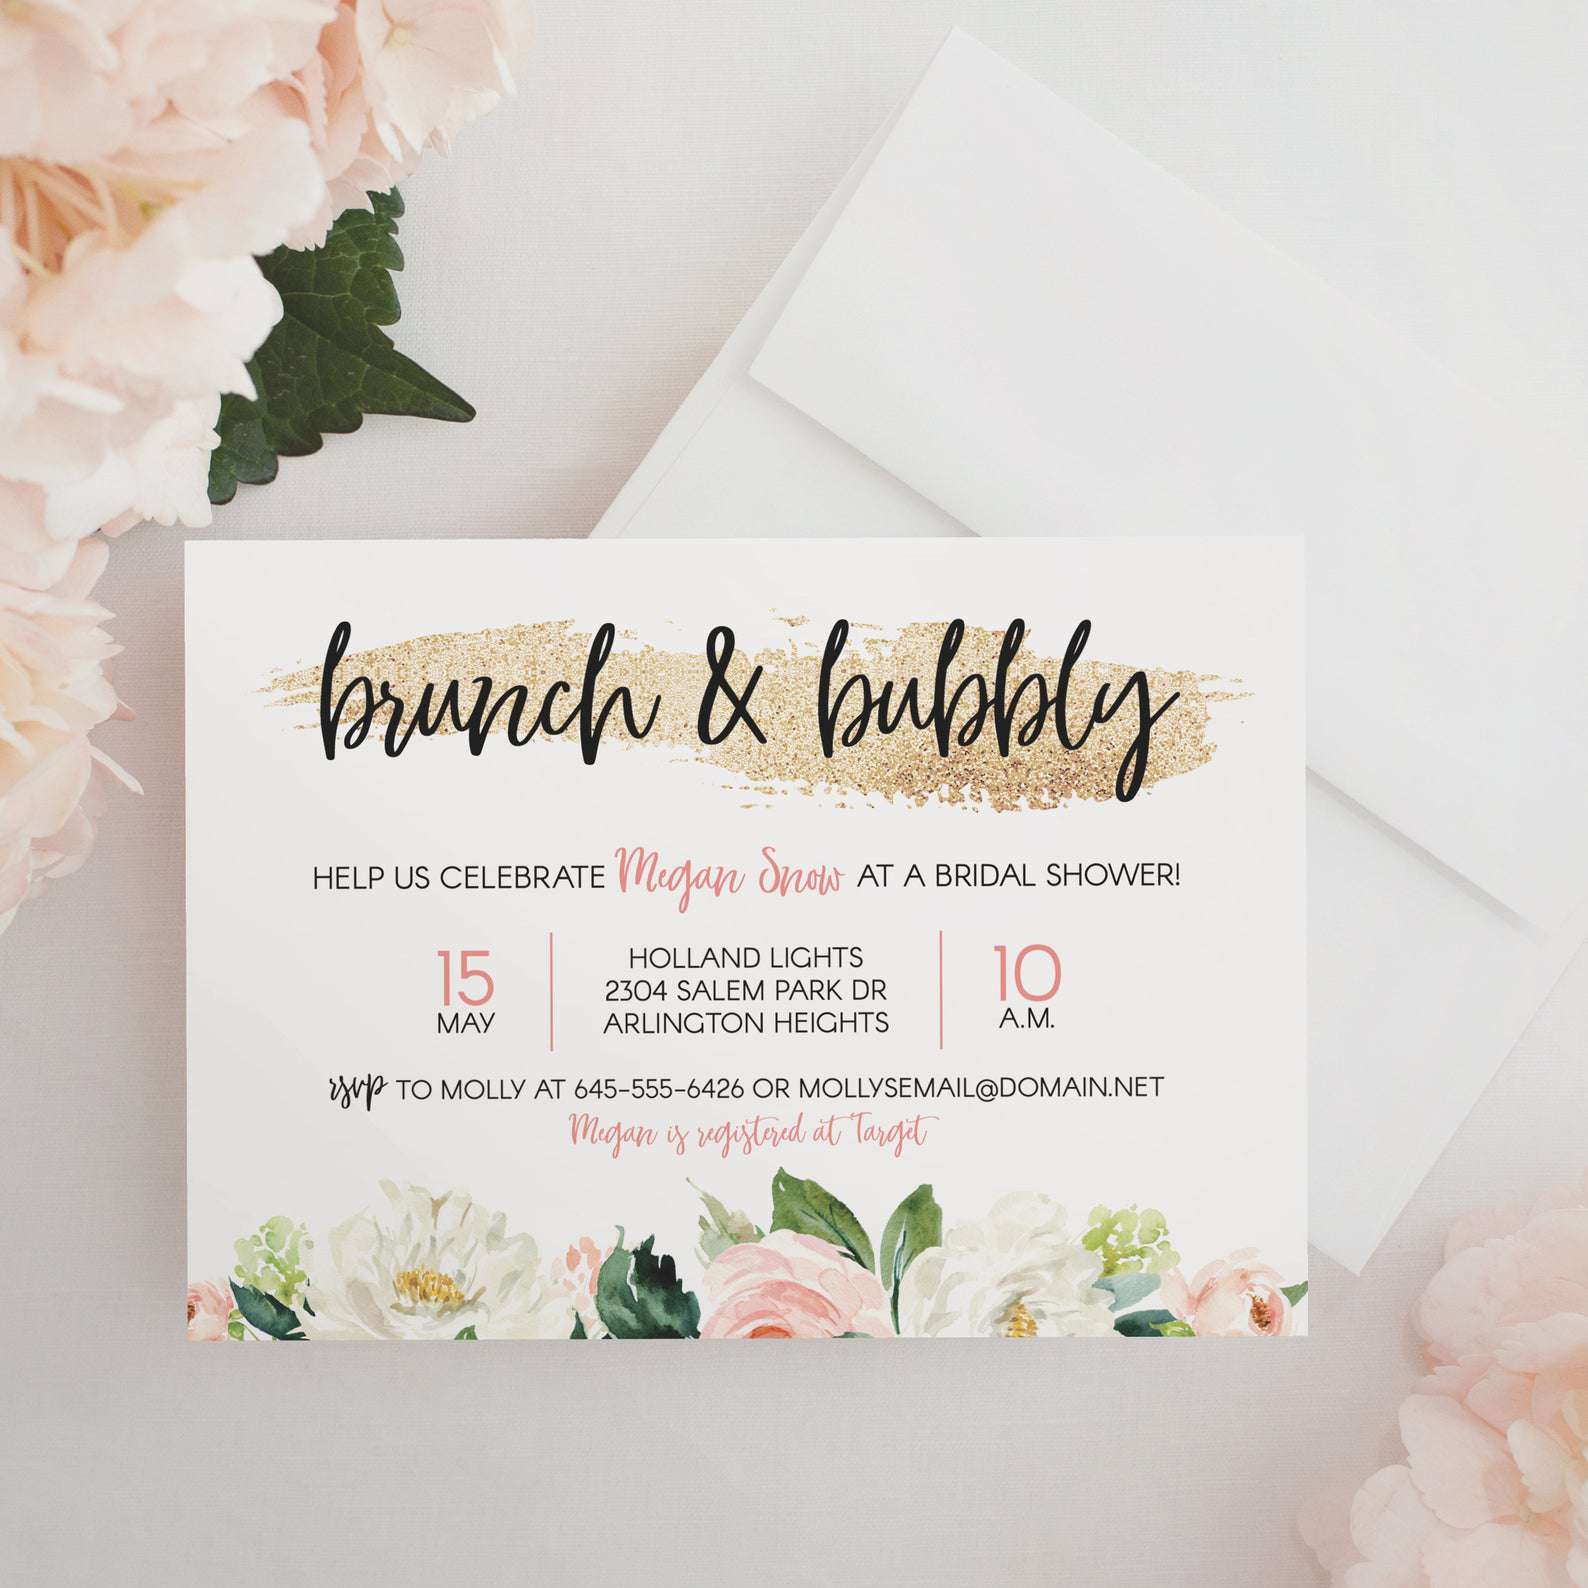 Bridal Shower Invitation Wording 101: Everything to Include on the Invites